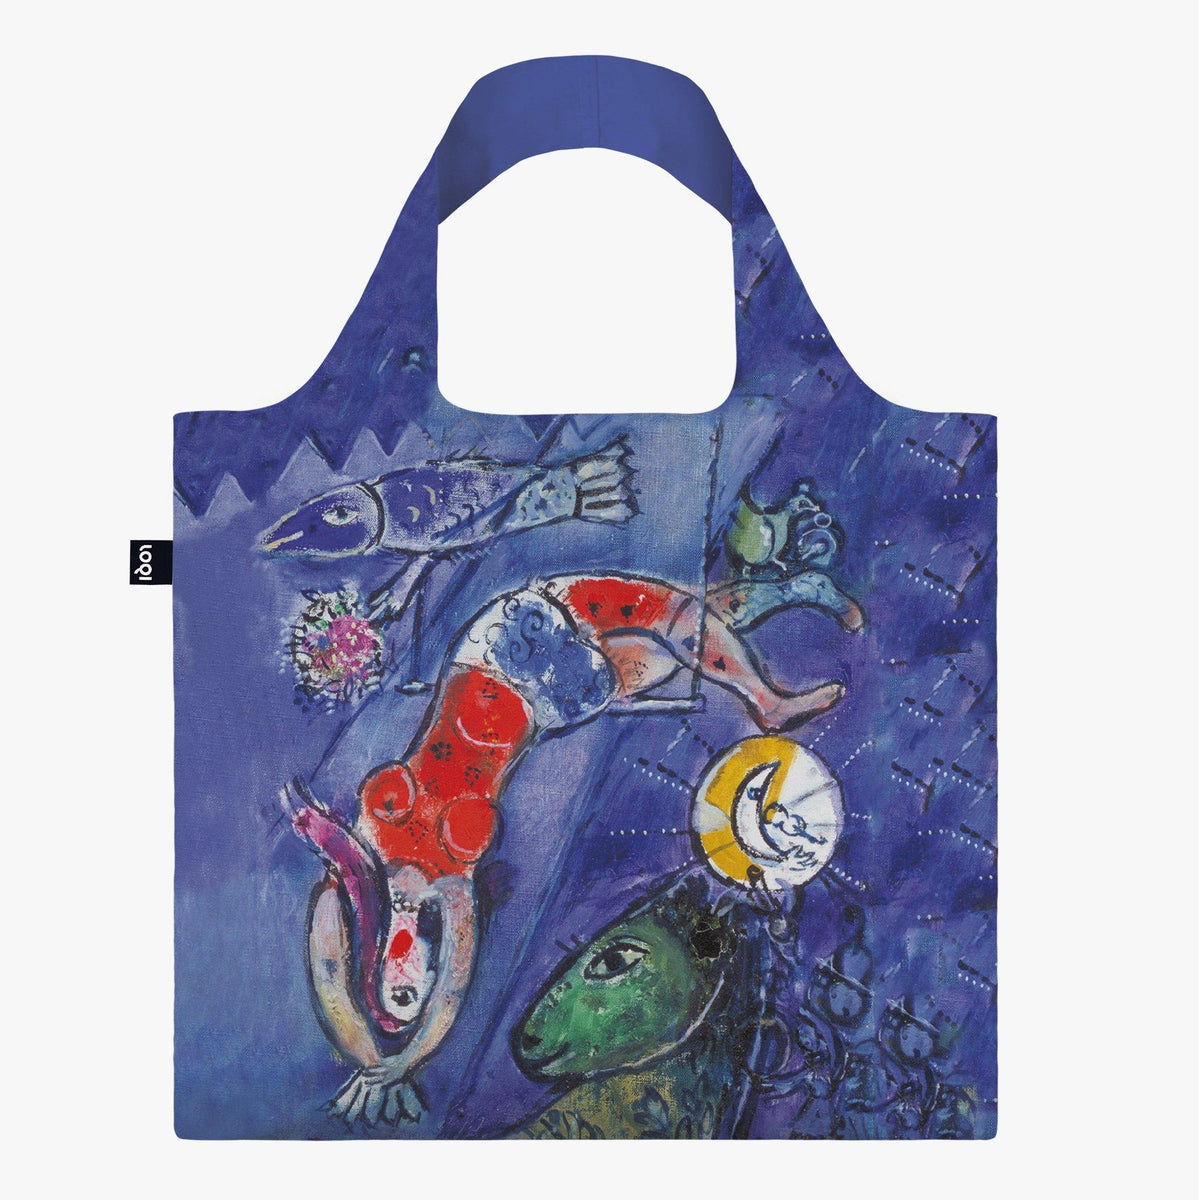 The Blue Circus Recycled Bag